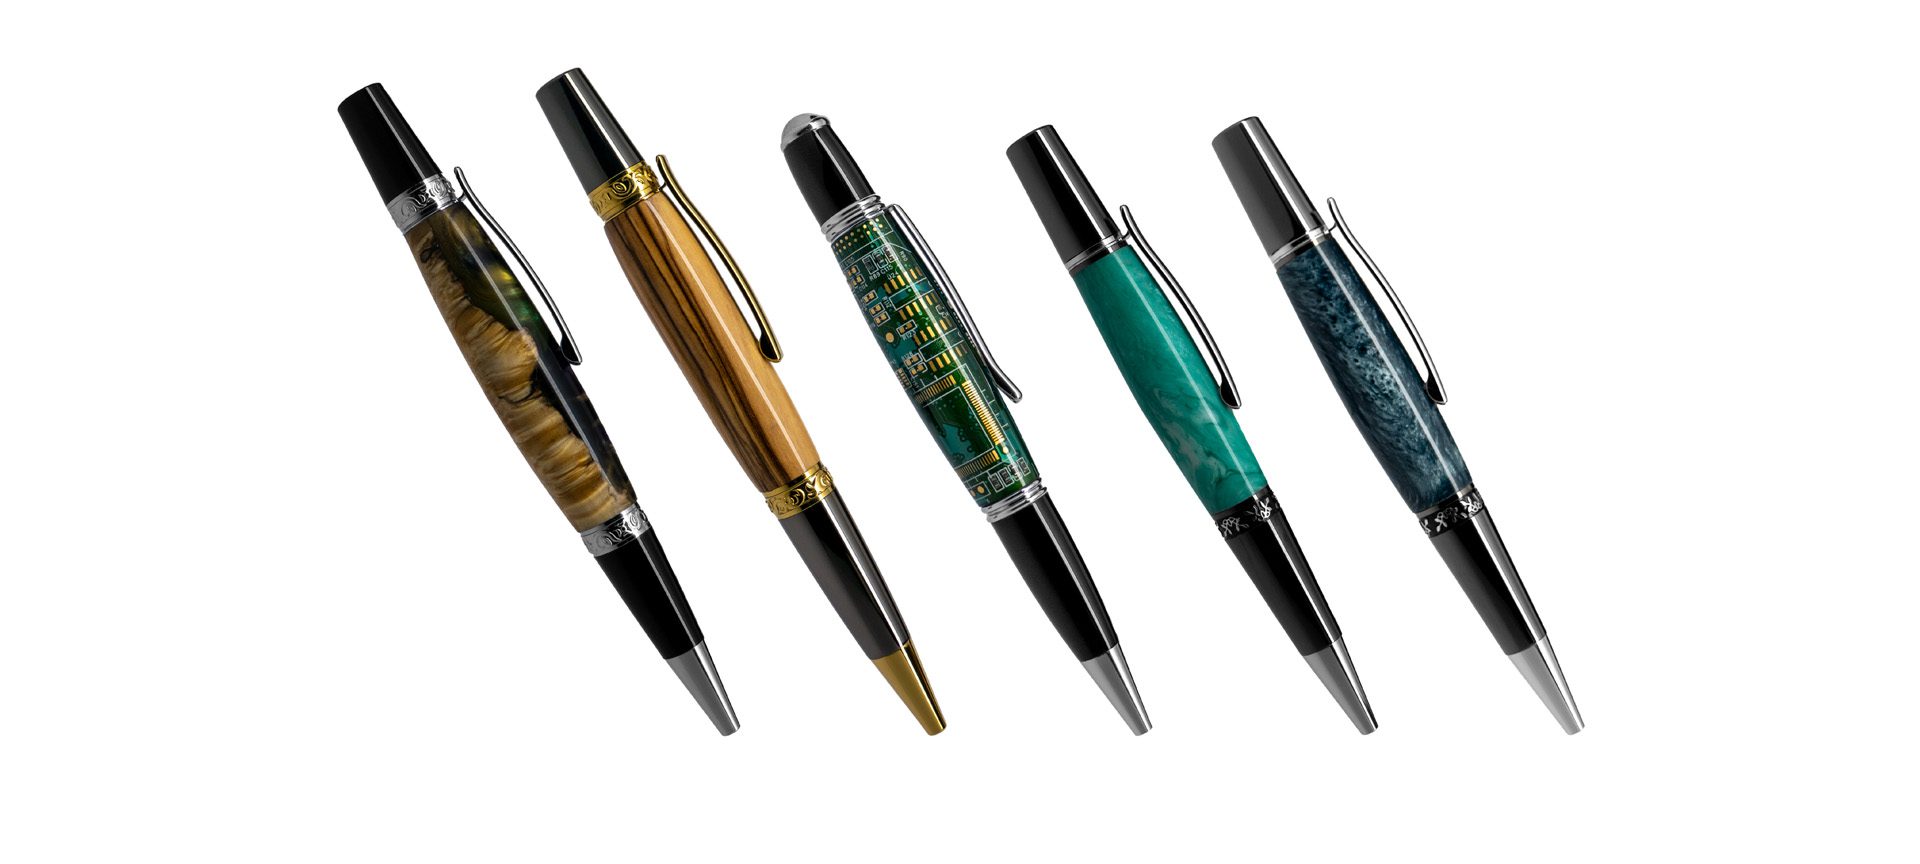 5 hand turned pens in a row